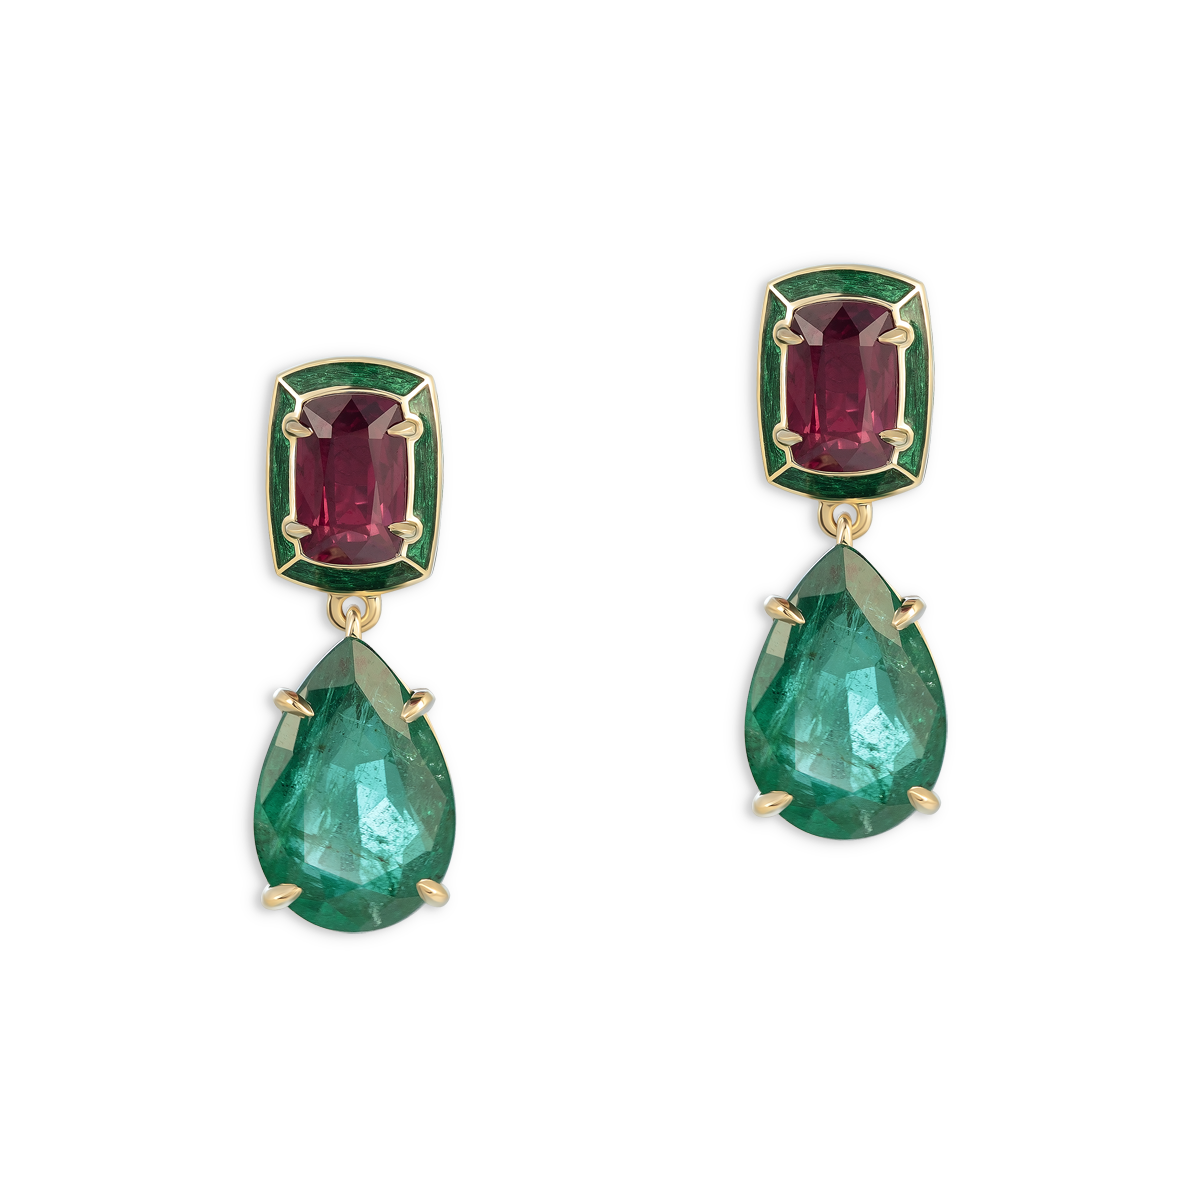 Earrings from the collection "Samarkand"